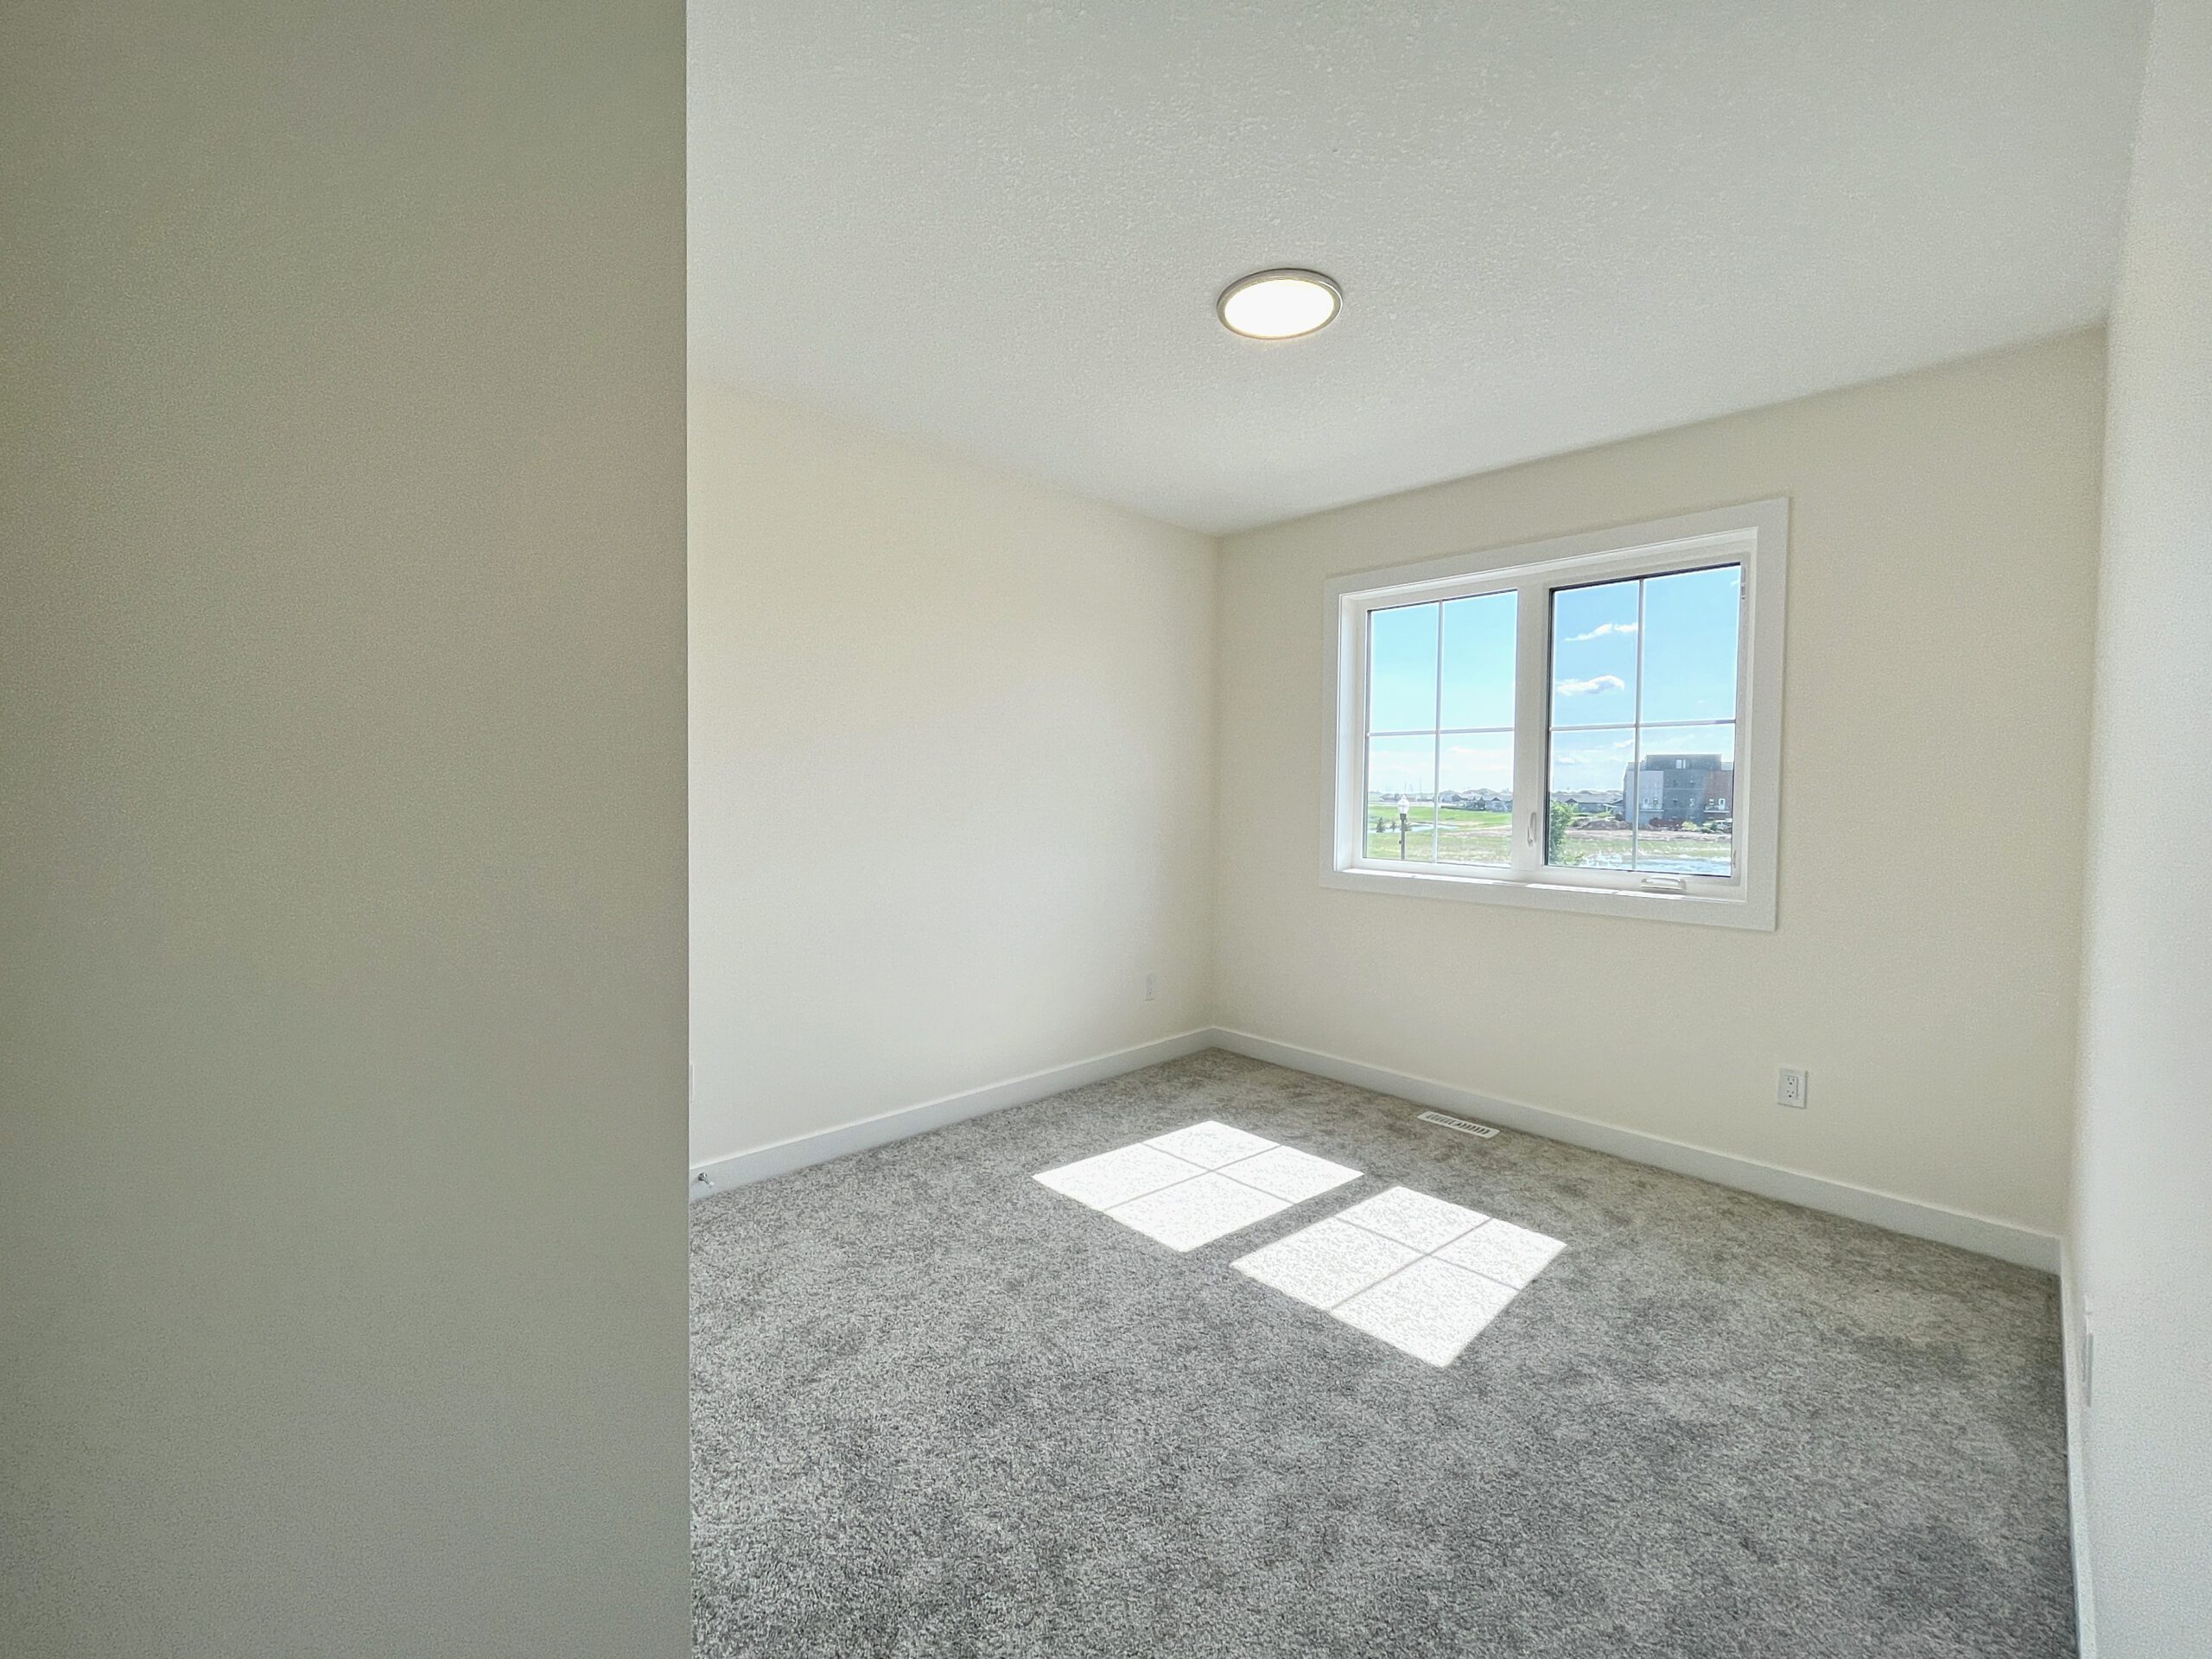 an empty room with a window and carpeted floor.